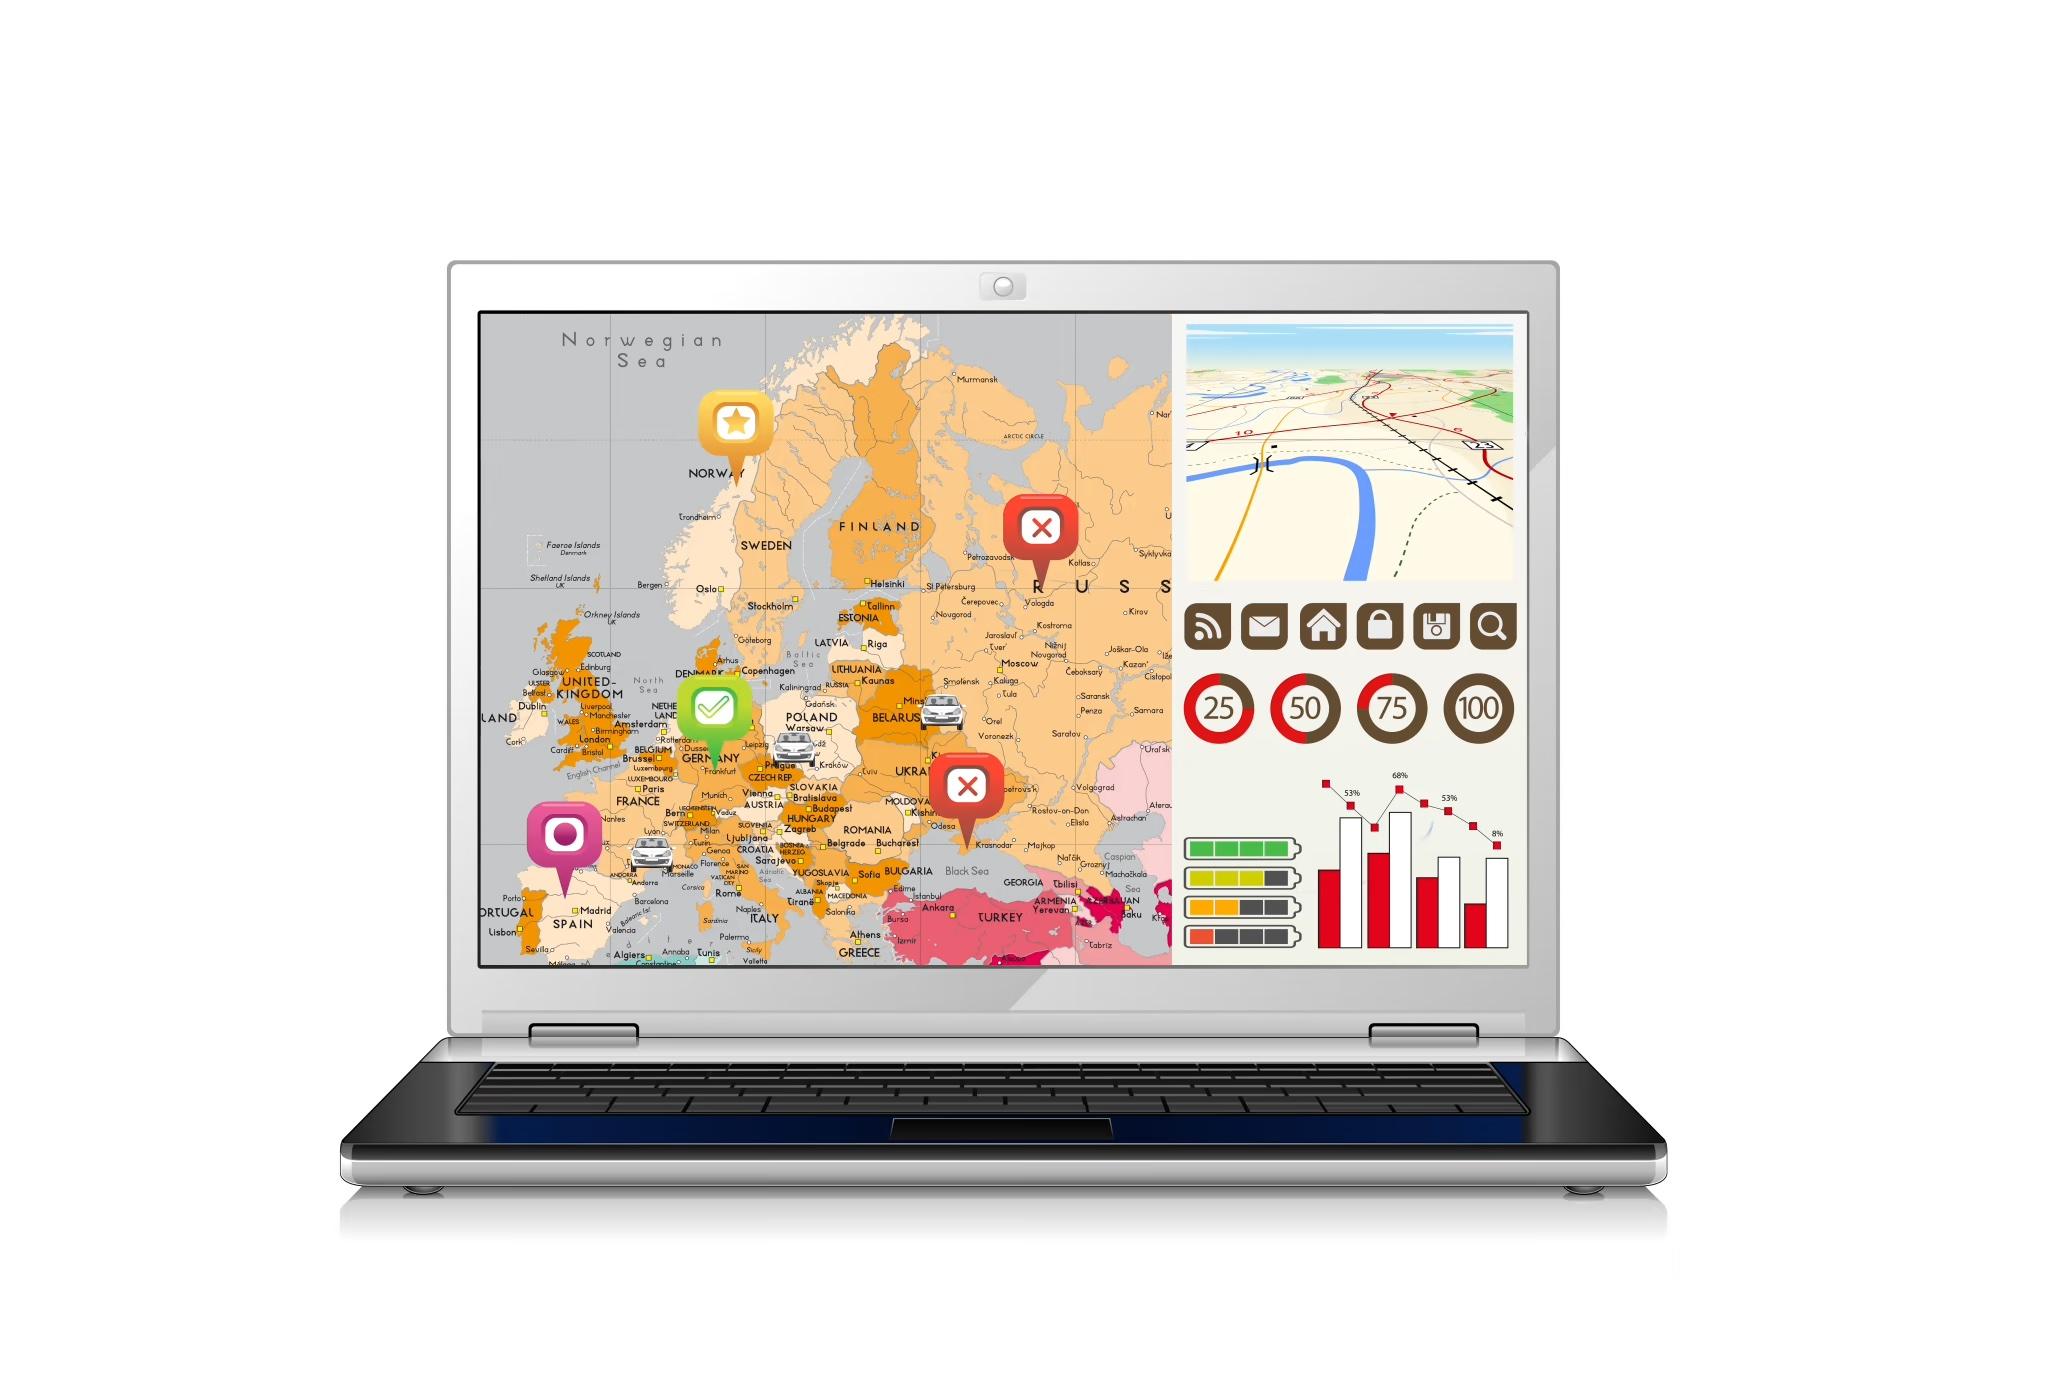 laptop computer open to fleet tracking software showing map and location of equipment